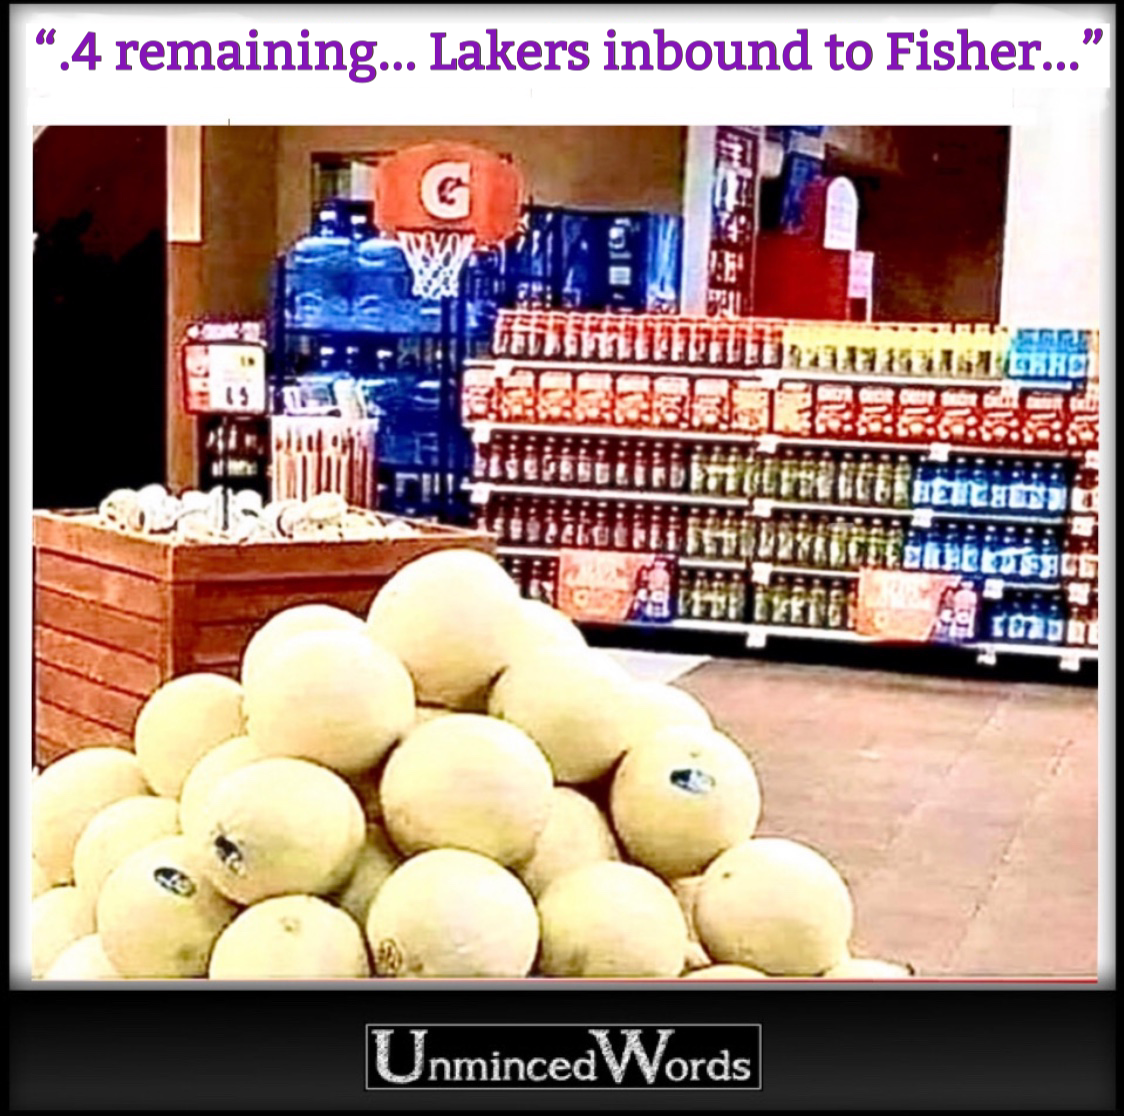 ‪‪“.4 remaining... Lakers inbound to Fisher...”‬